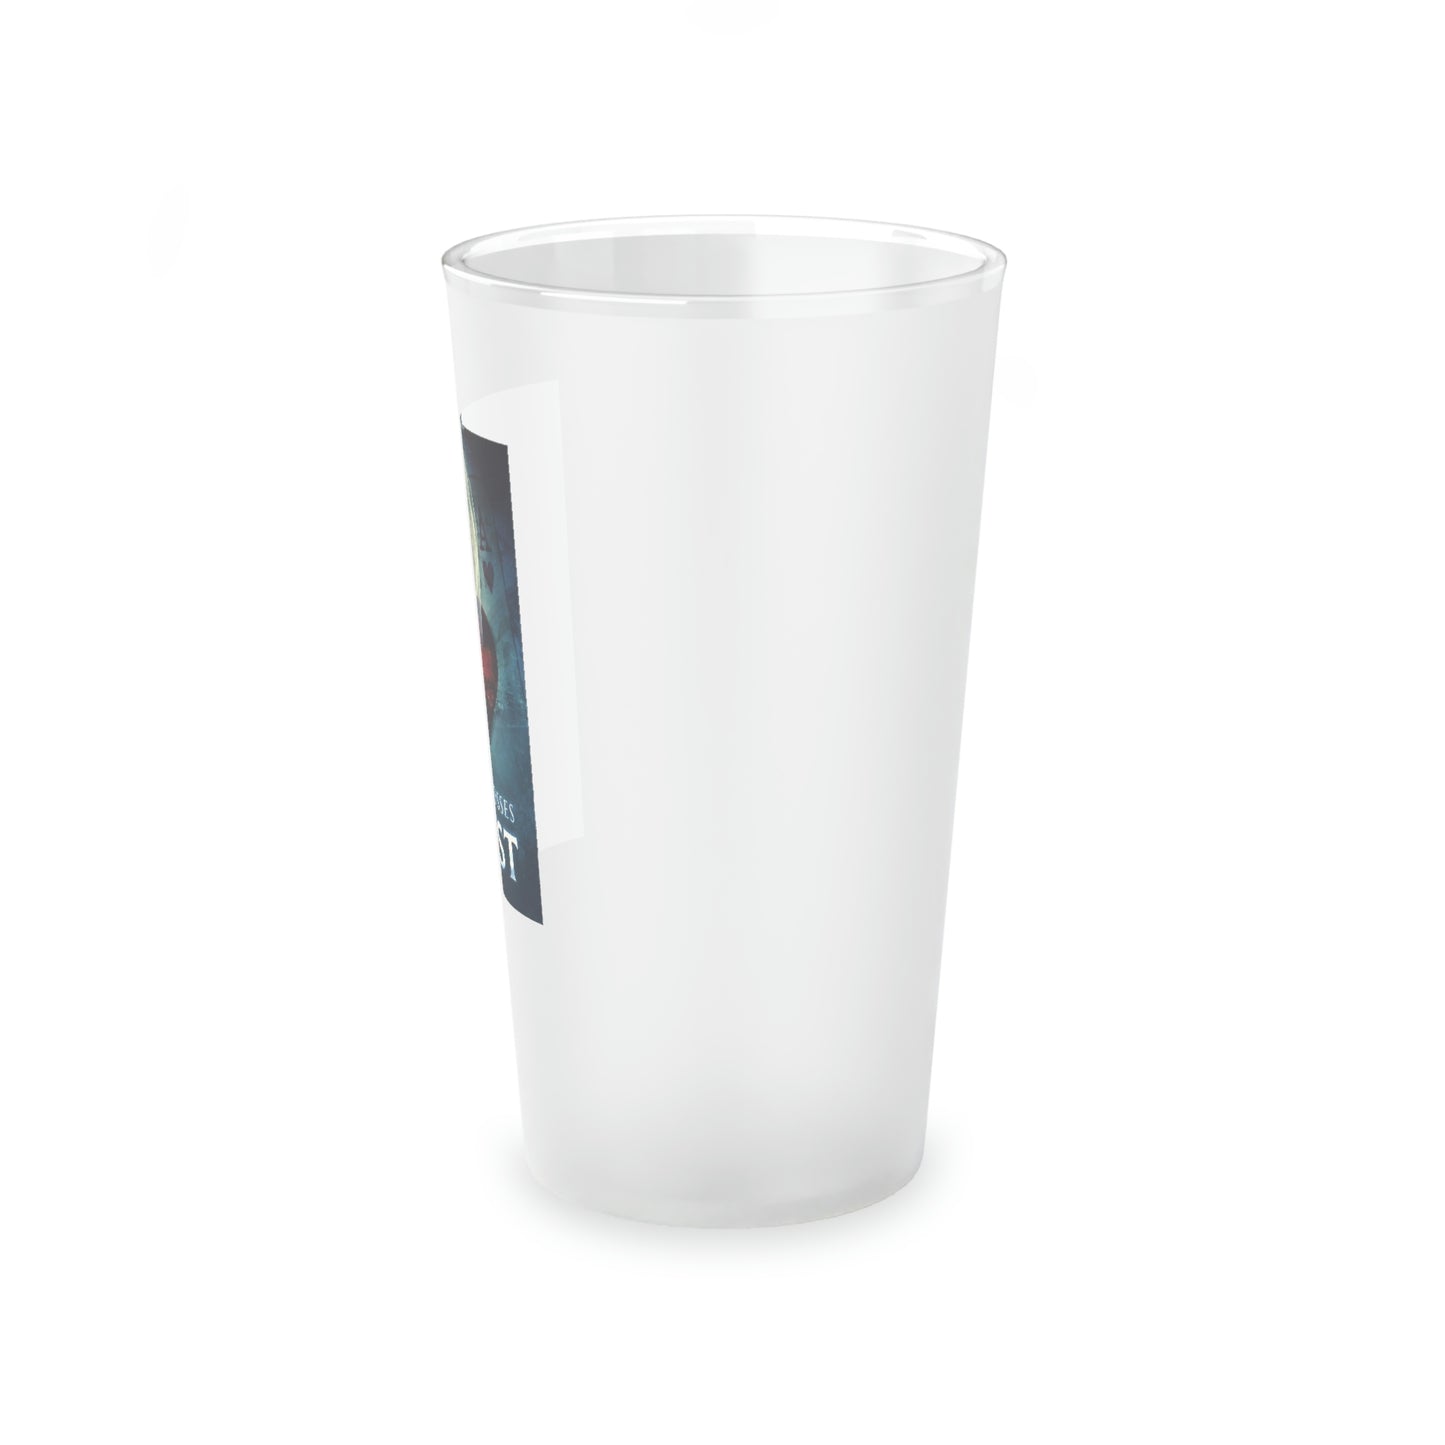 Gheist - Frosted Pint Glass